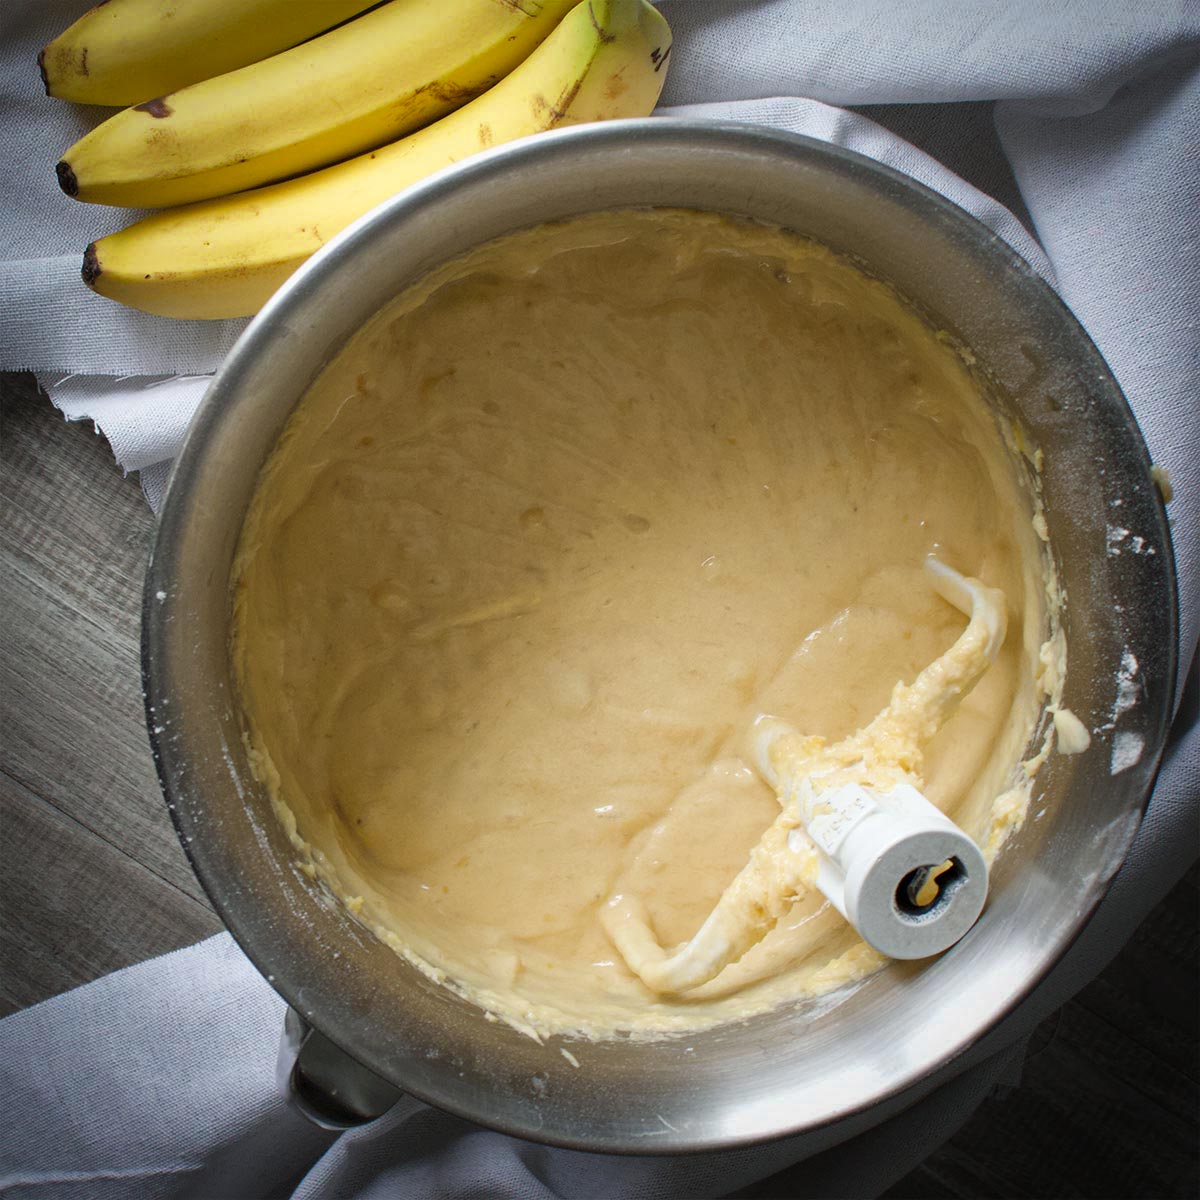 A mixing bowl filled with banana bread batter.